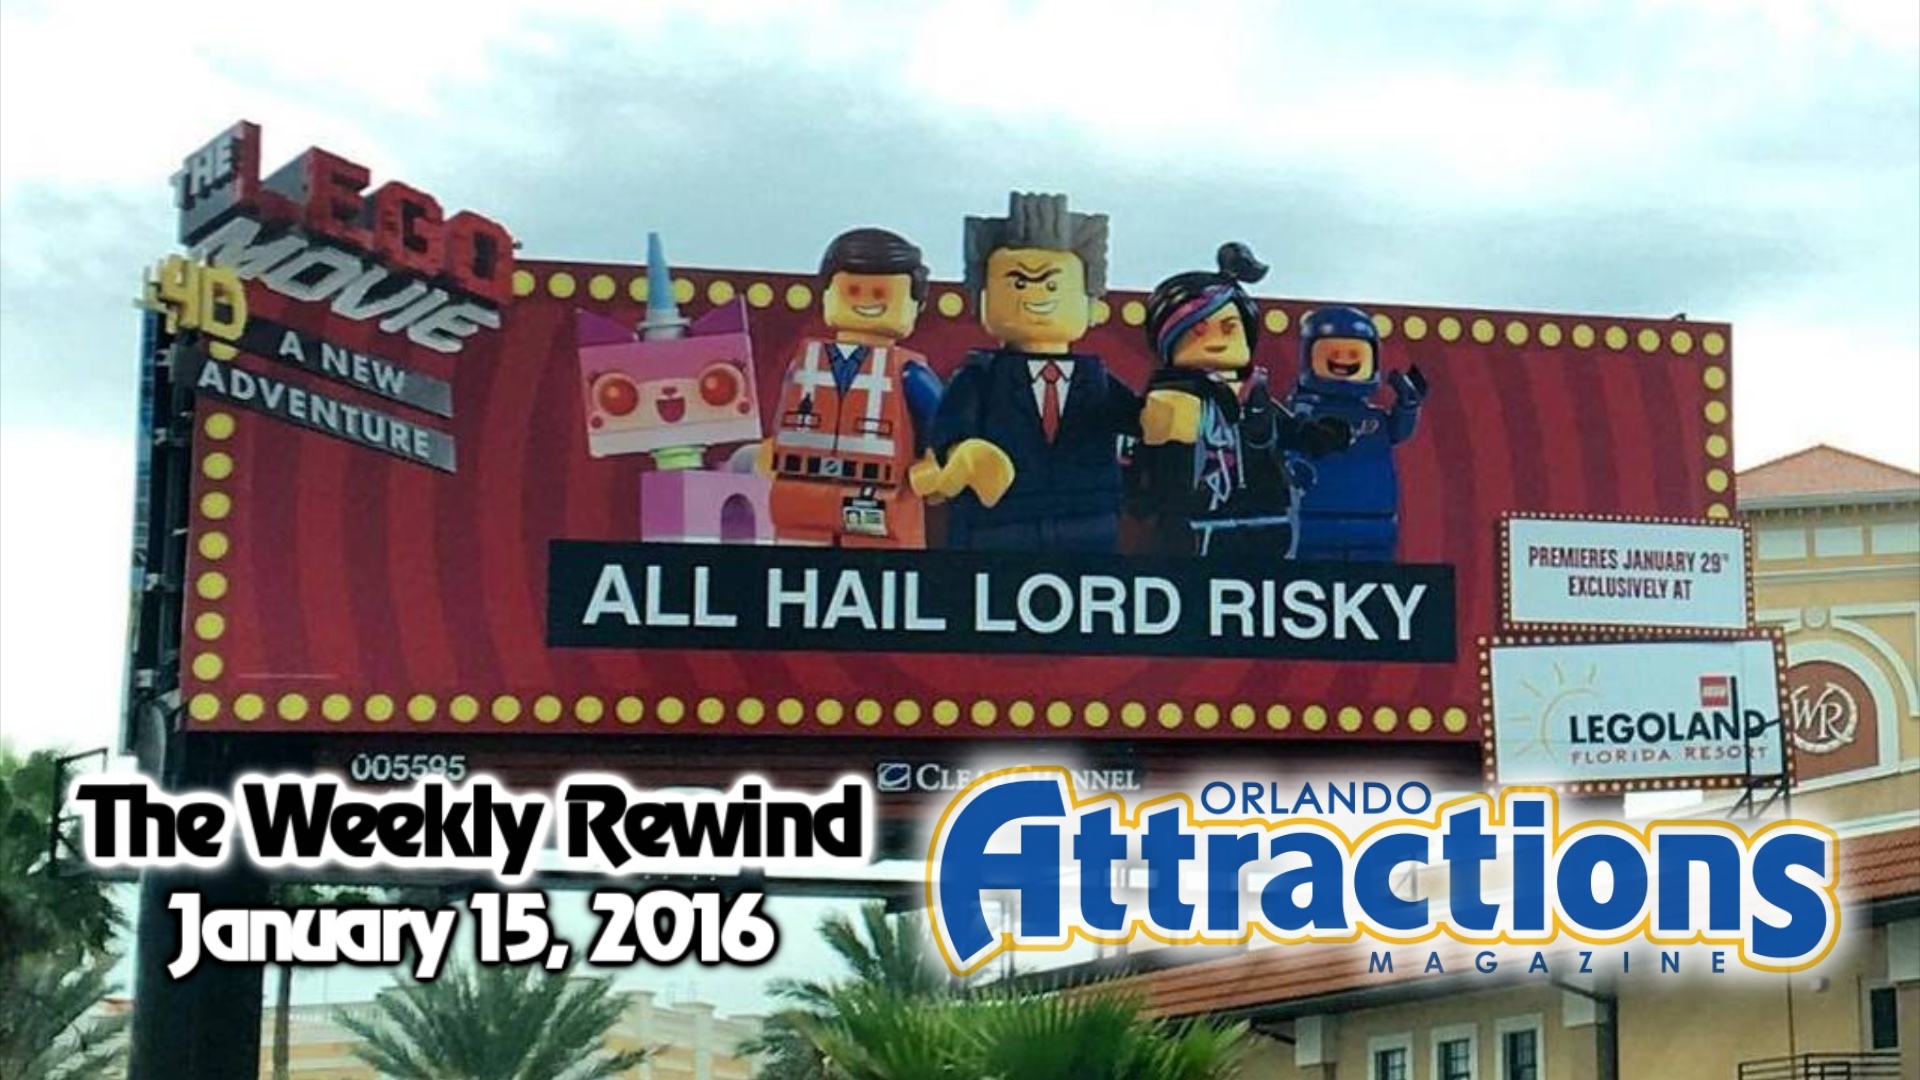 The Weekly Rewind @Attractions – Jan. 15, 2016